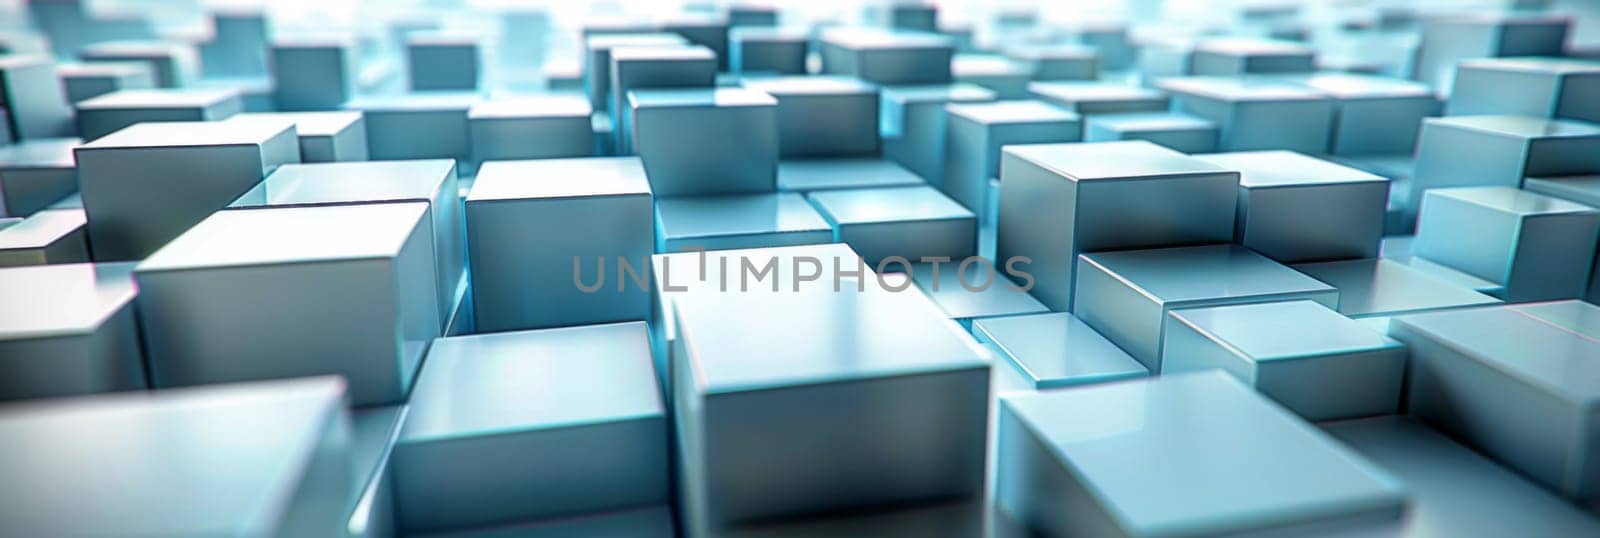 A large number of cubes are arranged in a pattern